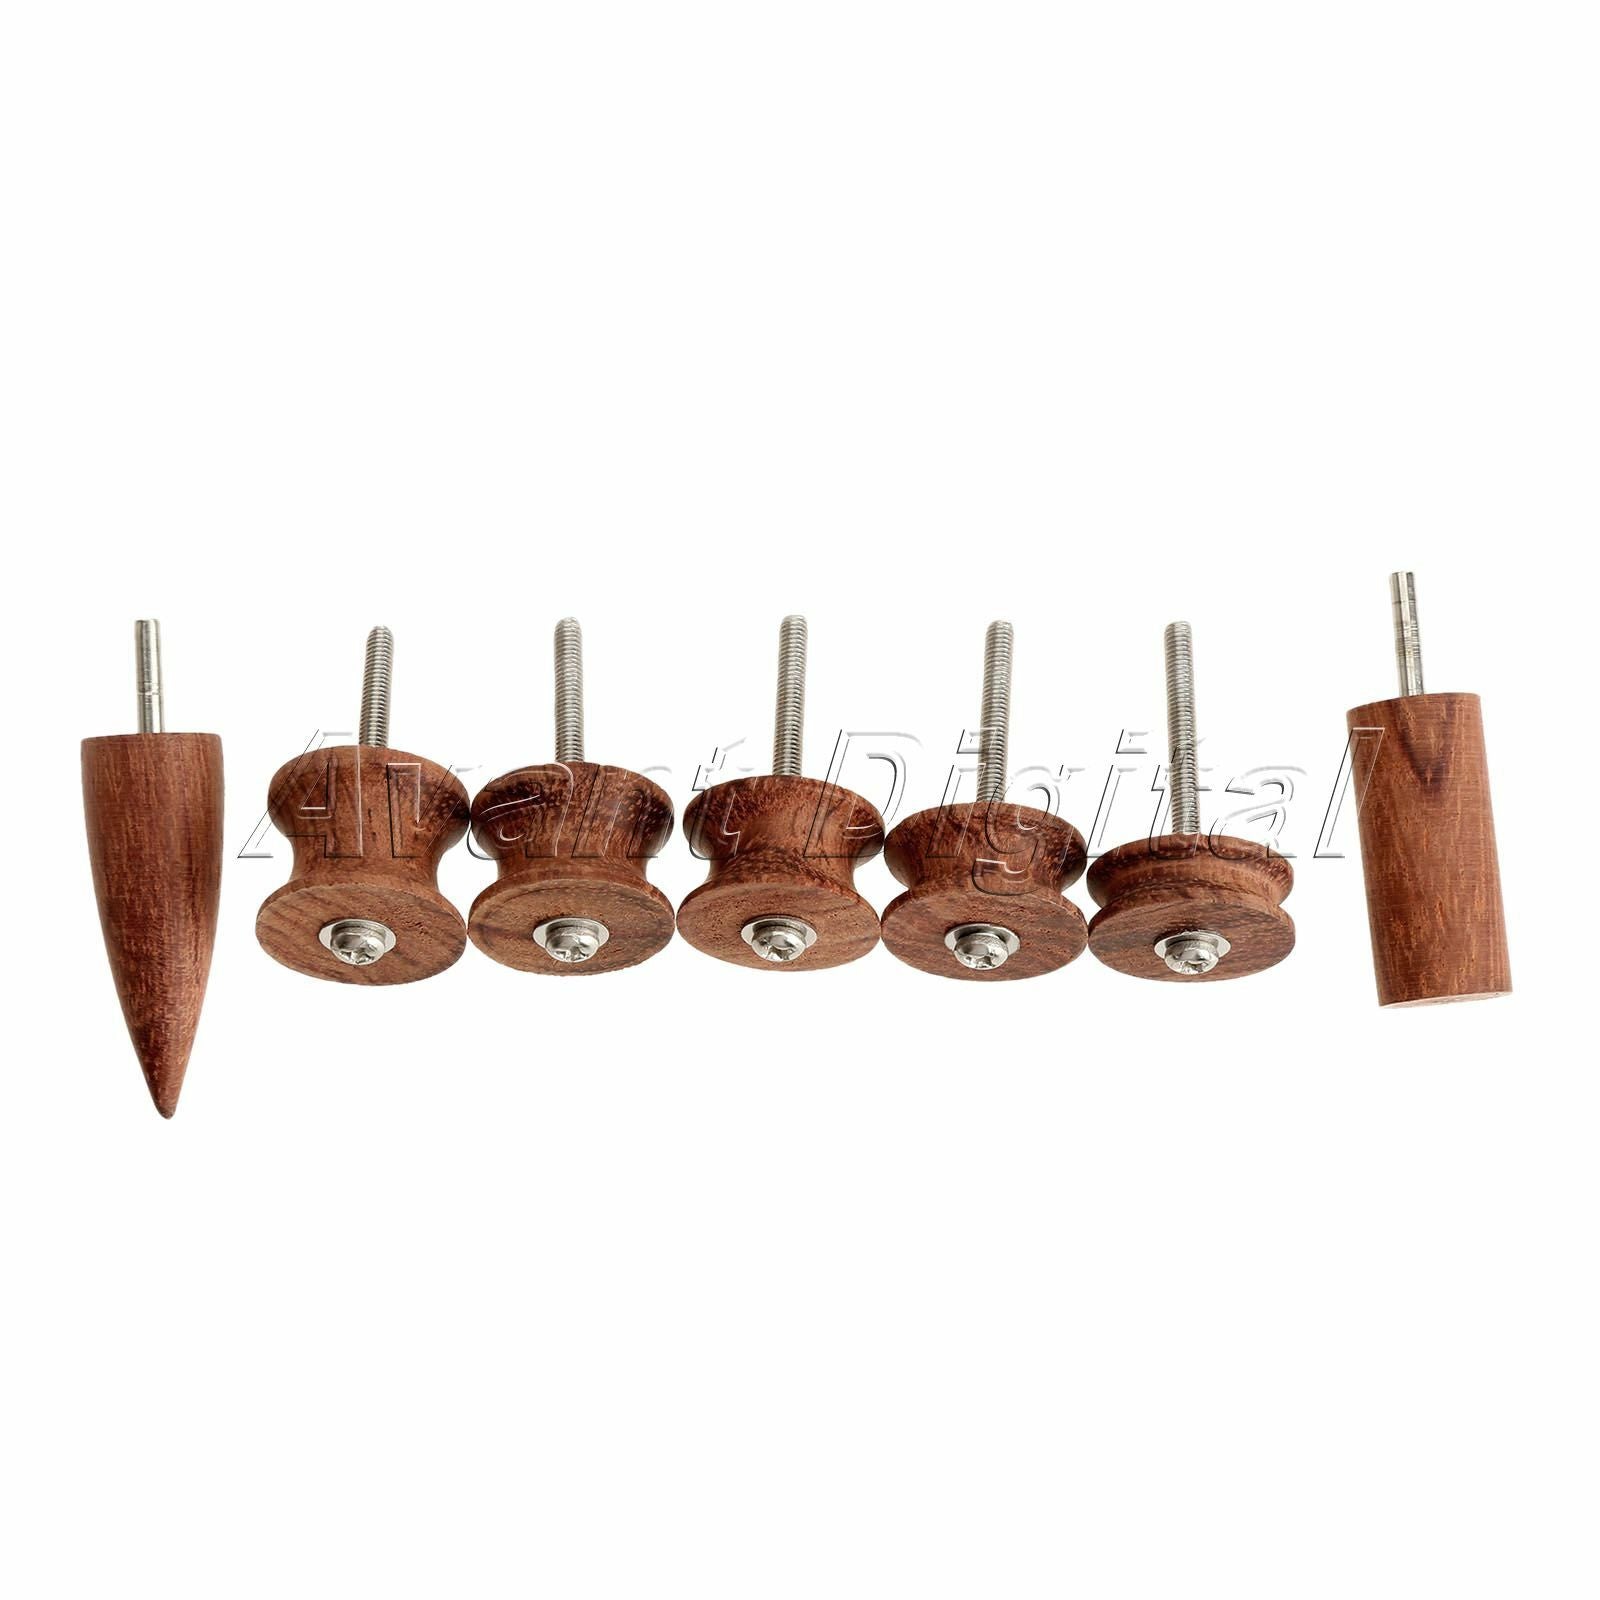 7 Sizes Convenience Leather Craft Burnisher Leather Slicker Wood Edge Tools